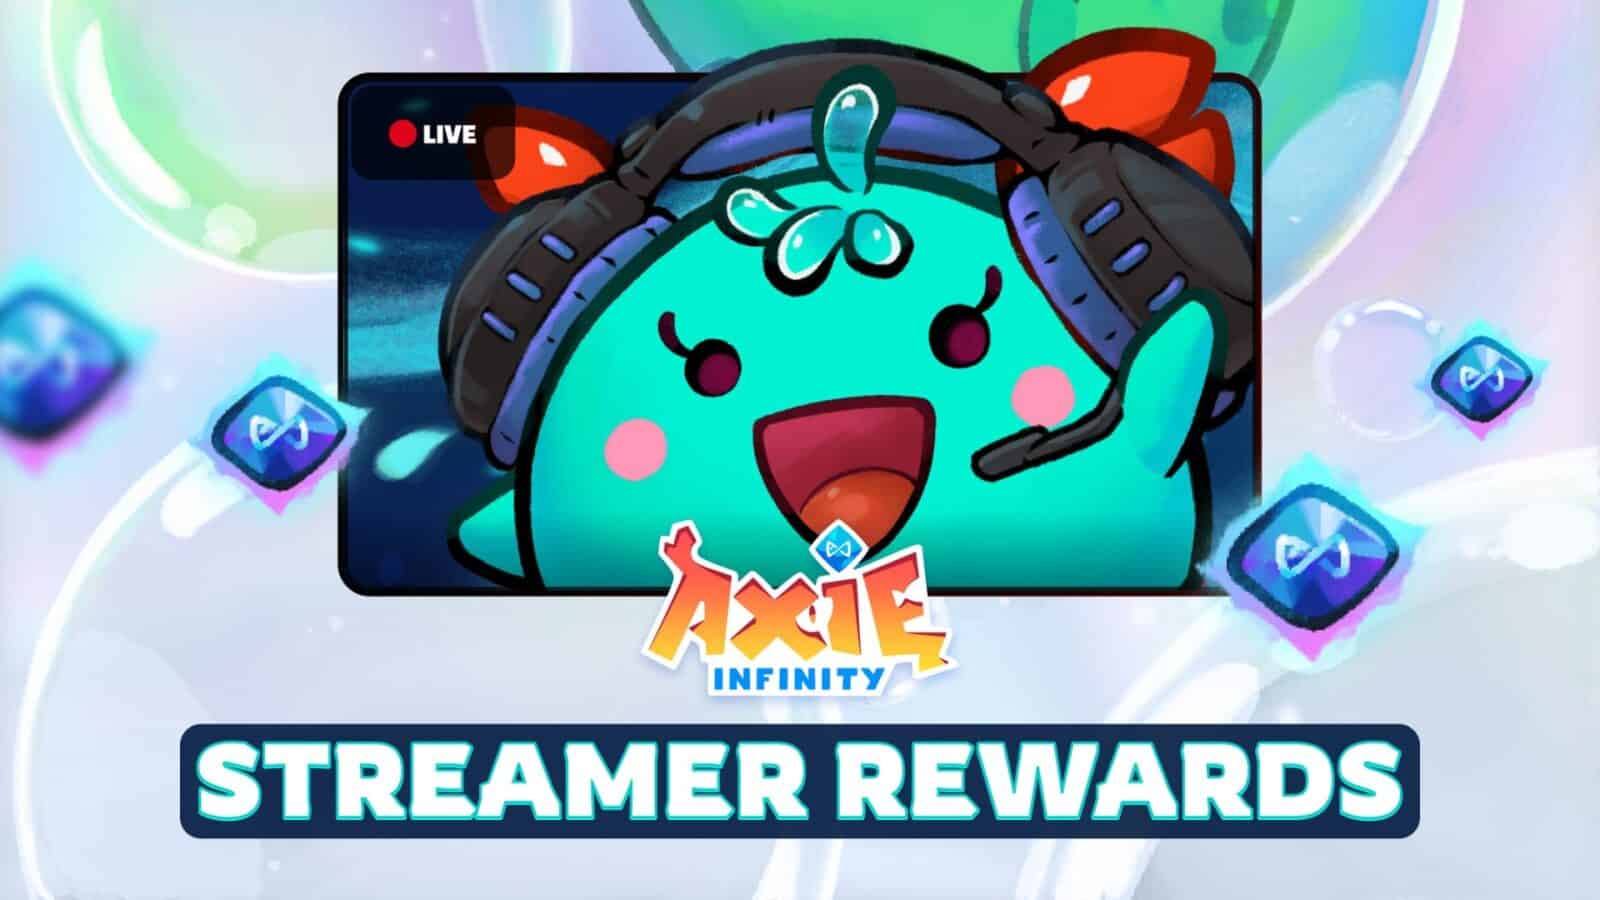 Get Paid For Being an Axie Streamer!